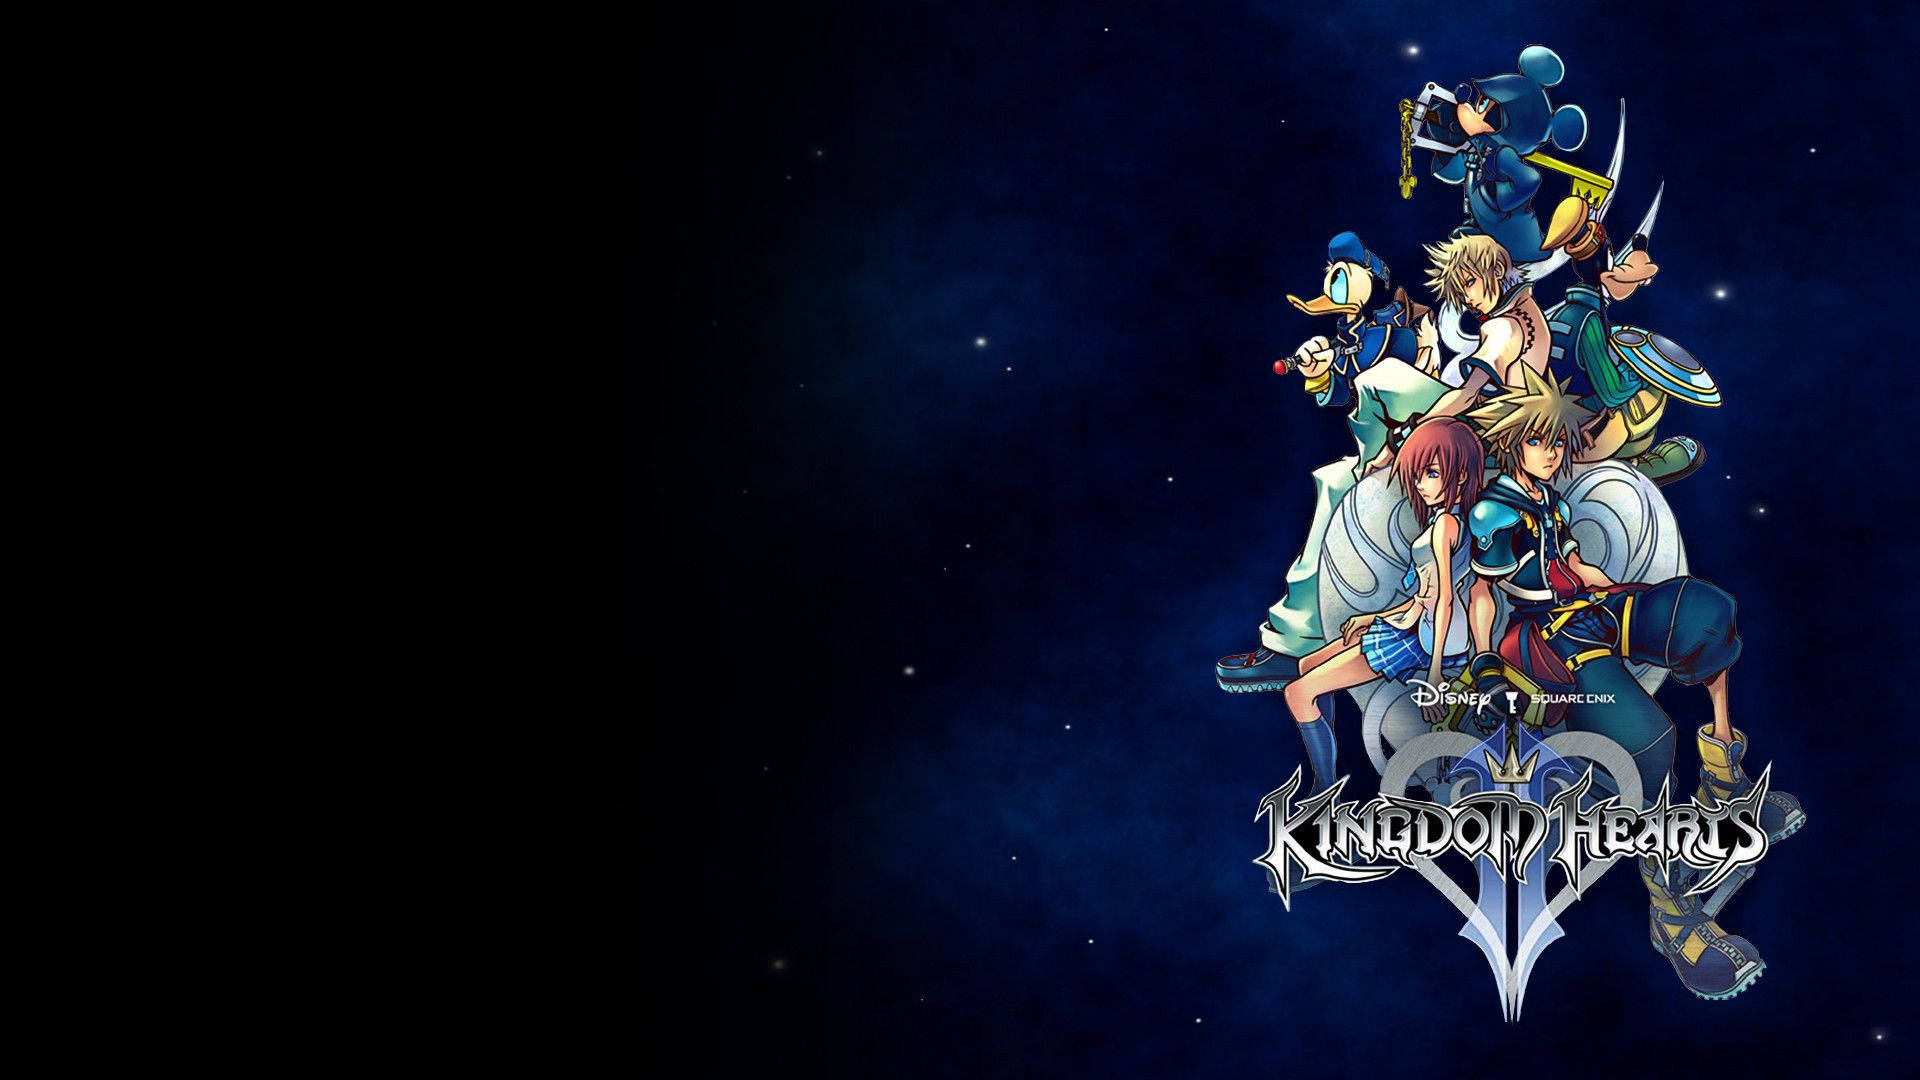 Join Sora and the Disney characters on a magical adventure in Kingdom Hearts Wallpaper